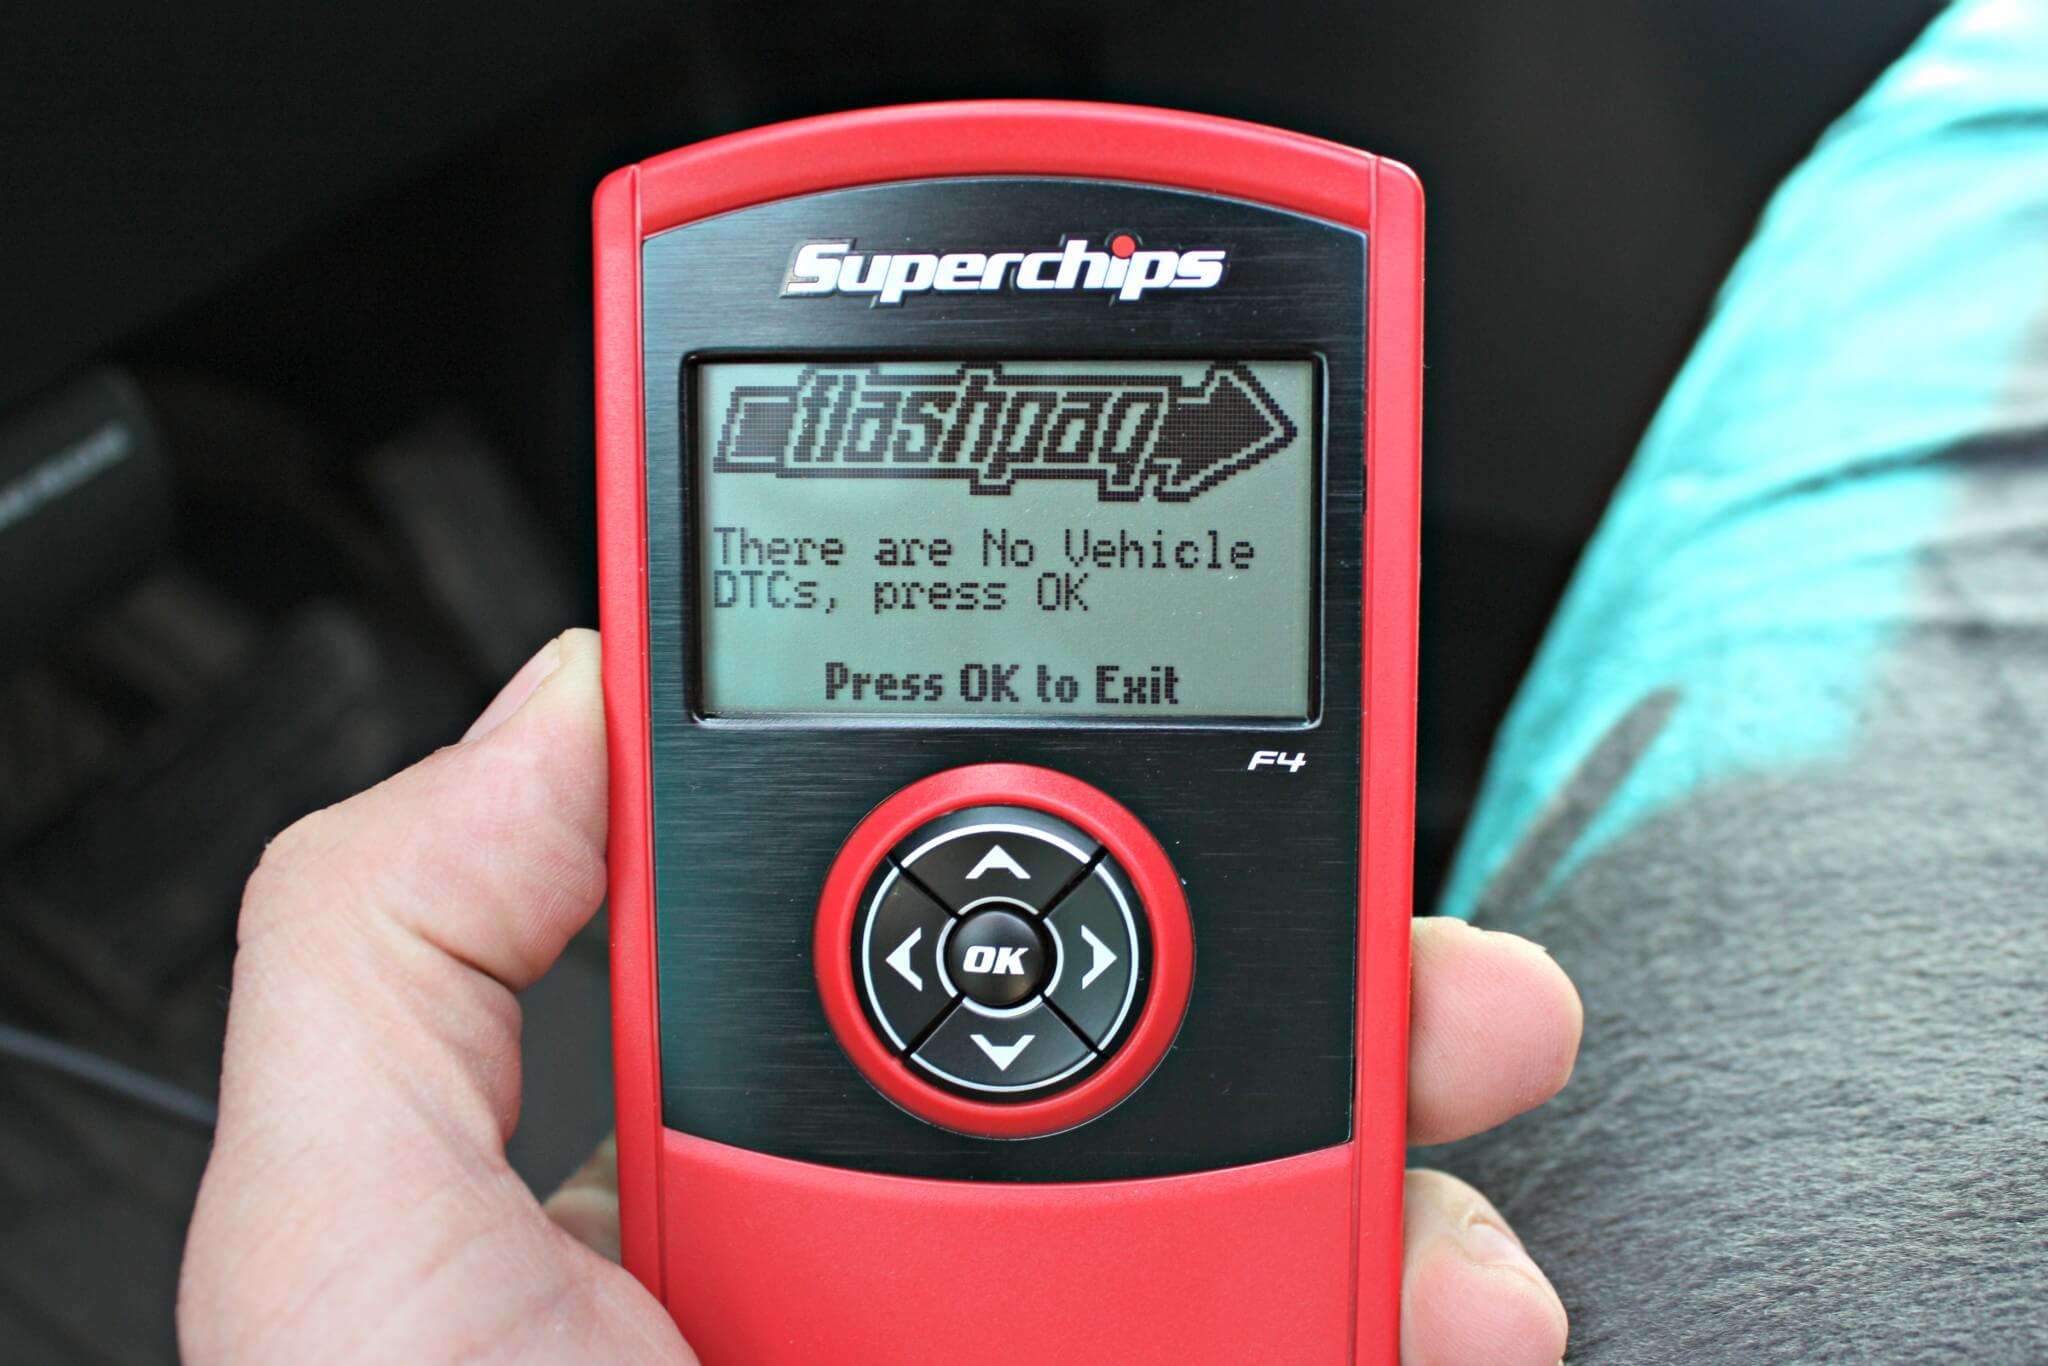 11. Another nice feature found within the Superchips F4 is the ability to read and clear diagnostic trouble codes (DTCs). Should you ever have a check engine light pop up on the dash, the F4 can be plugged into the OBD-II and used to read the ECM to help diagnose or erase the trouble code. So, for around $350 you get a scan tool with free performance tuning.